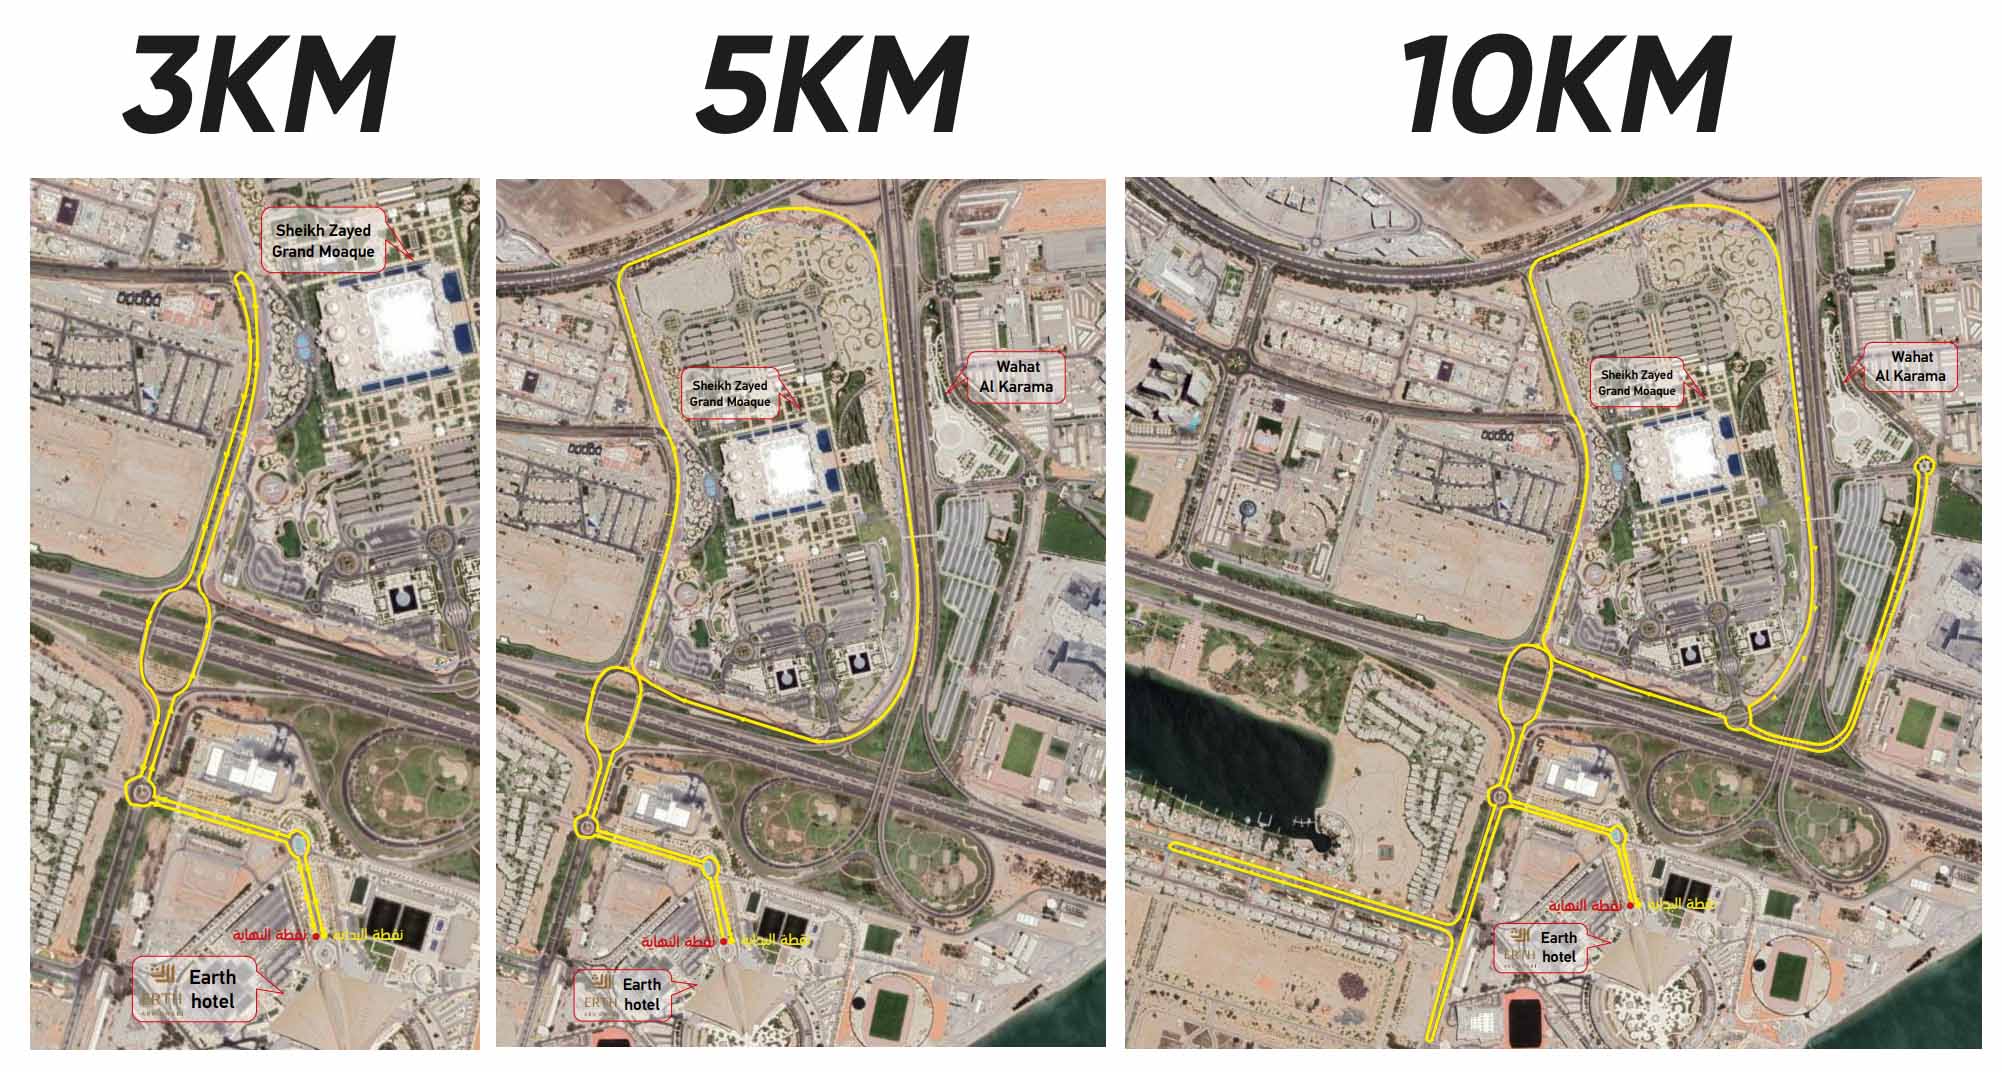 Route options for Zayed Charity Marathon in Abu Dhabi - 3k, 5k, 10k